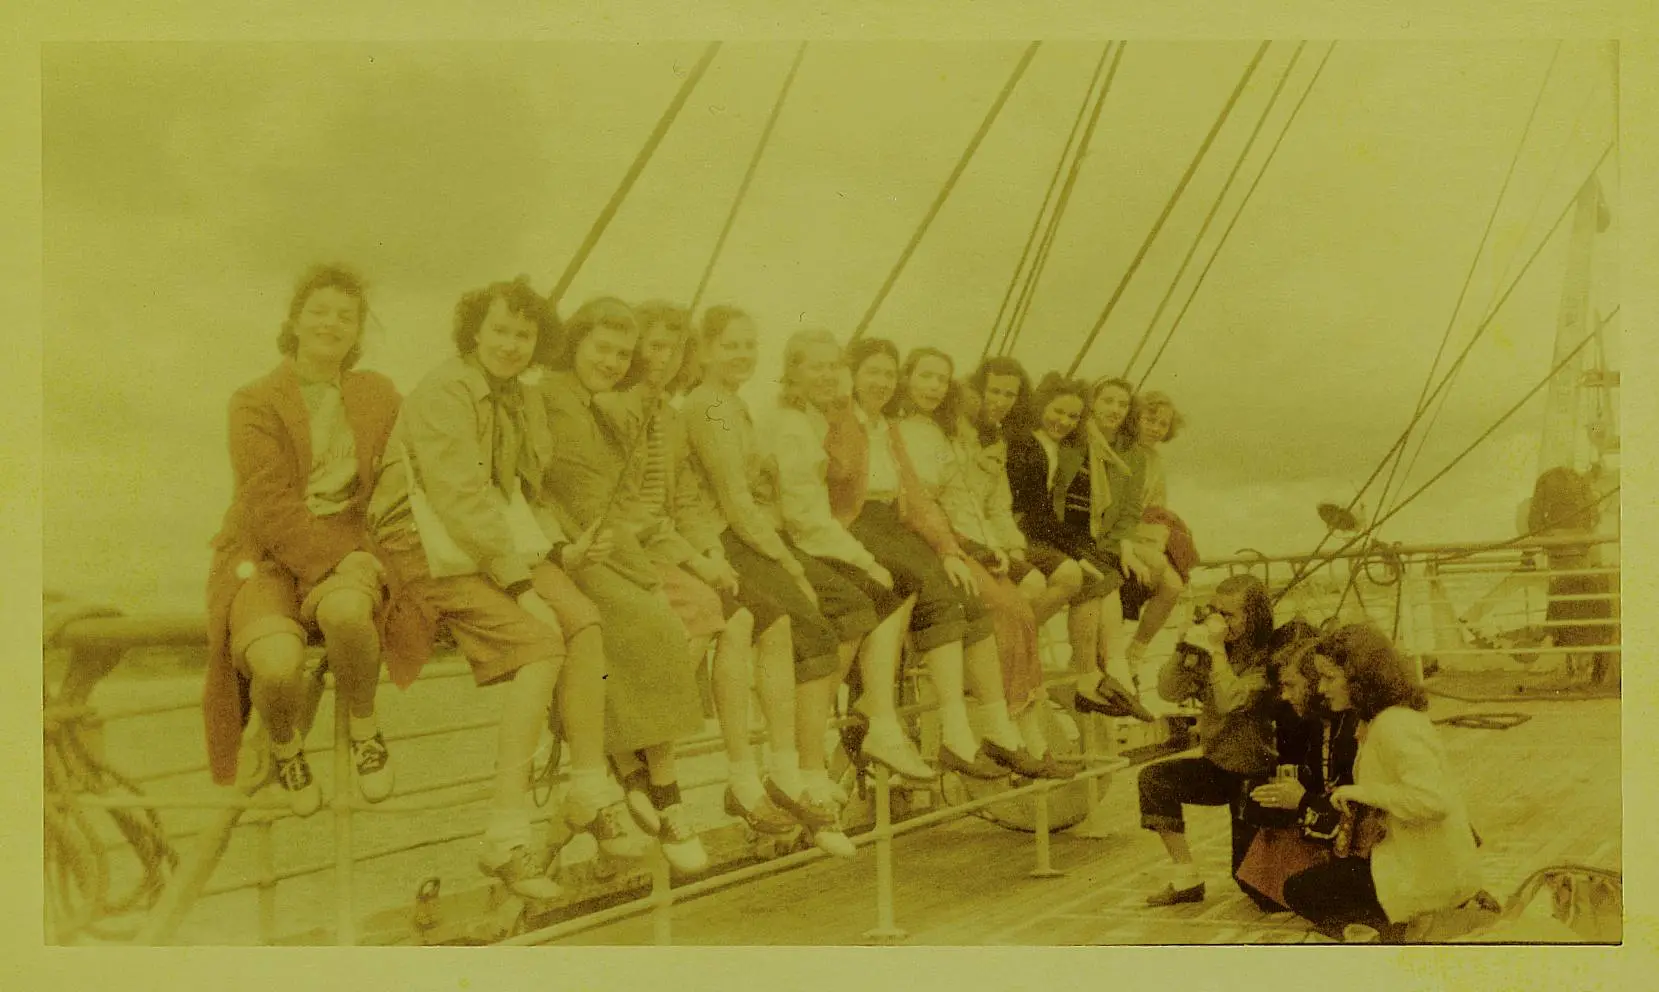 European field trip in 1948, where girls posing together on the shipboard.